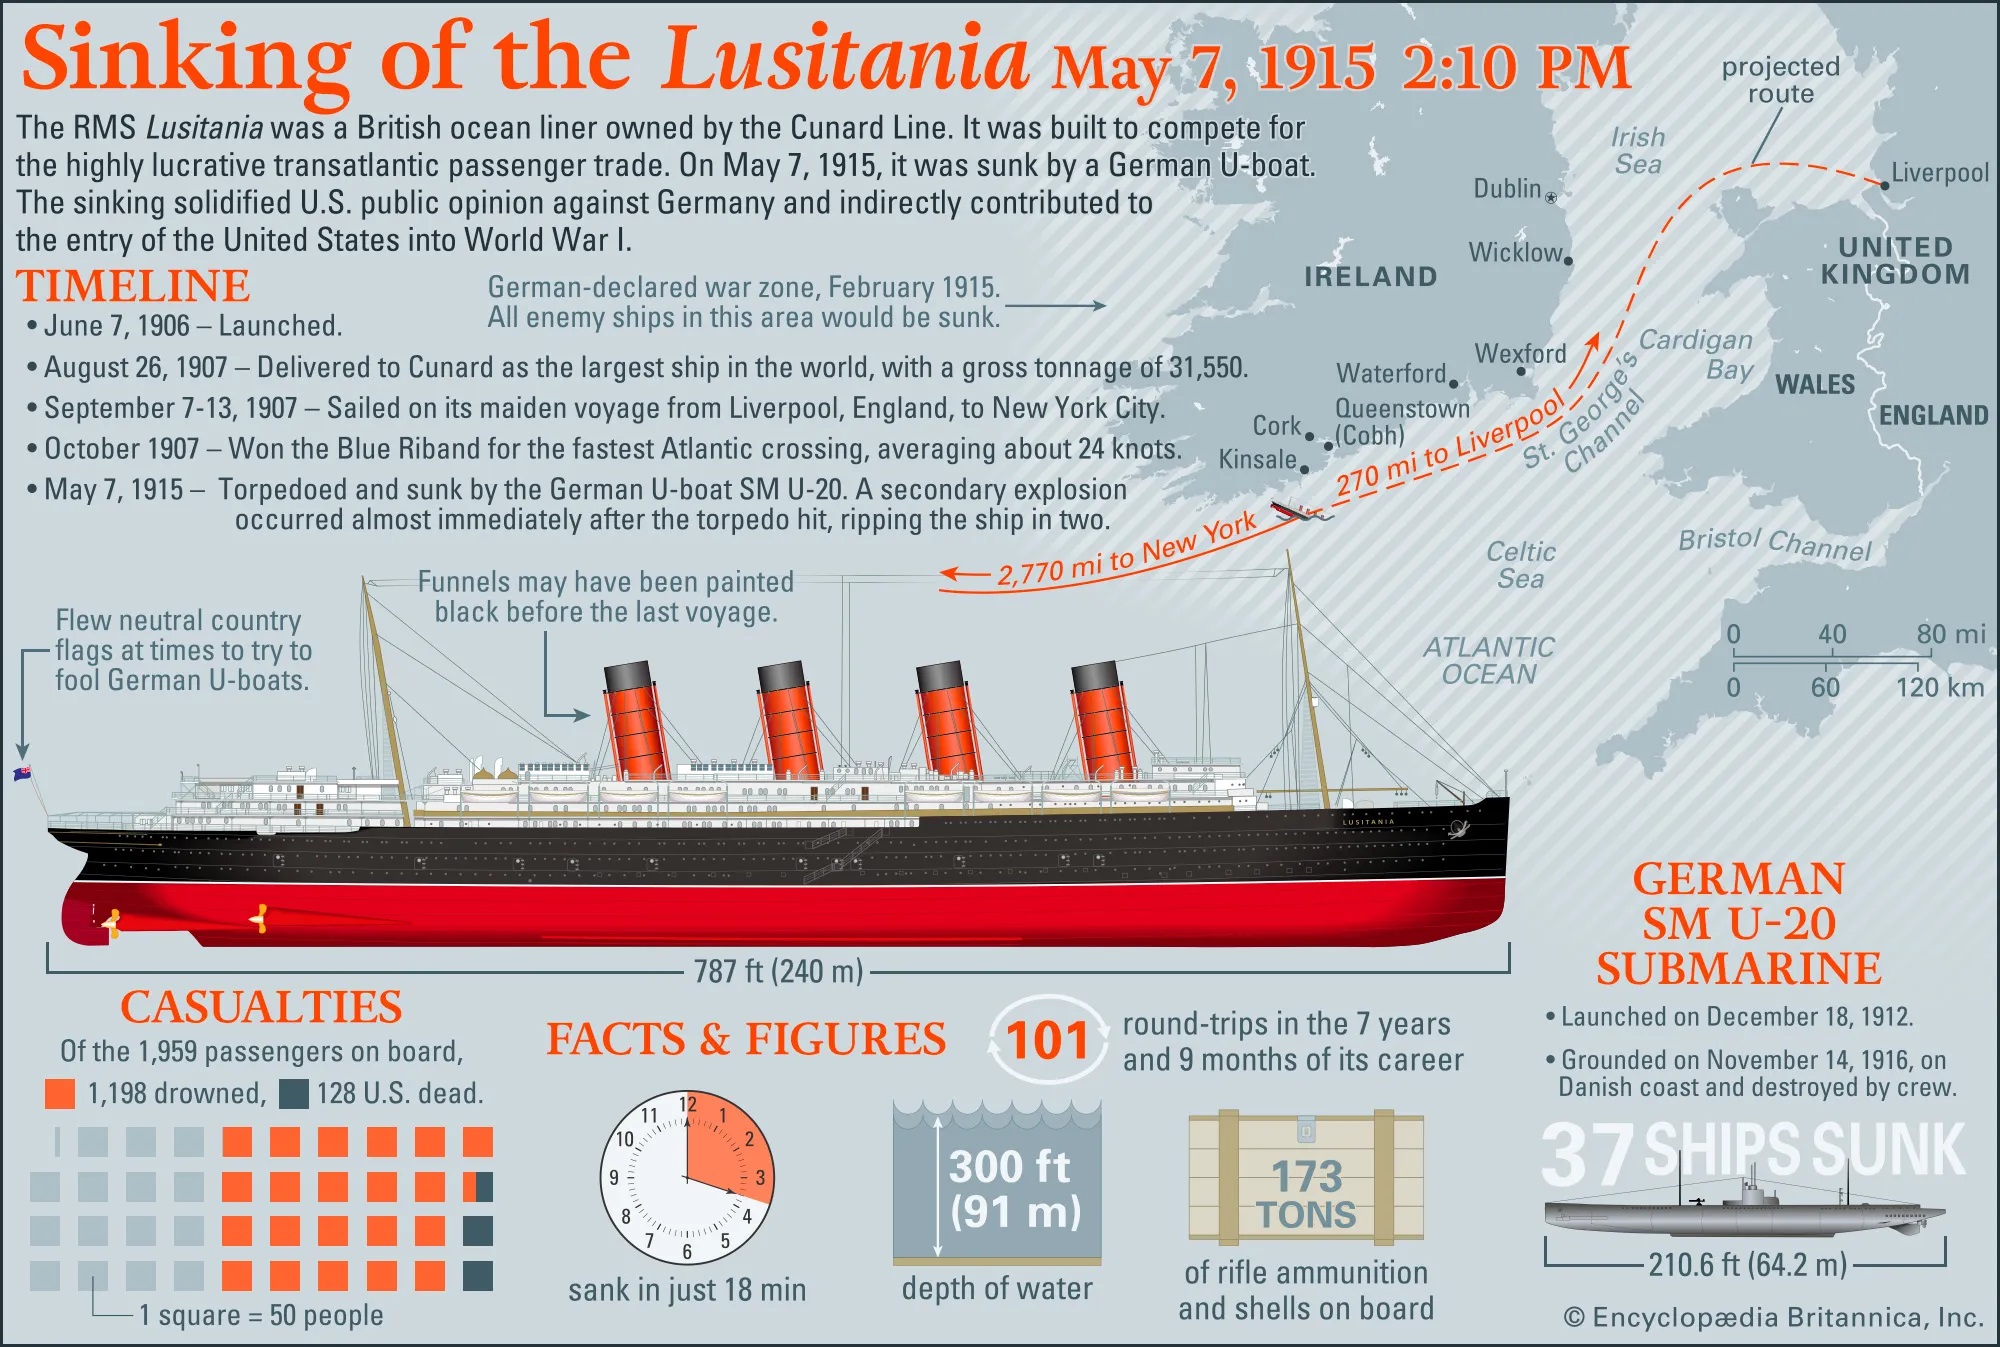 The Lusitania, a British ocean liner, sank after being torpedoed by a German submarine.